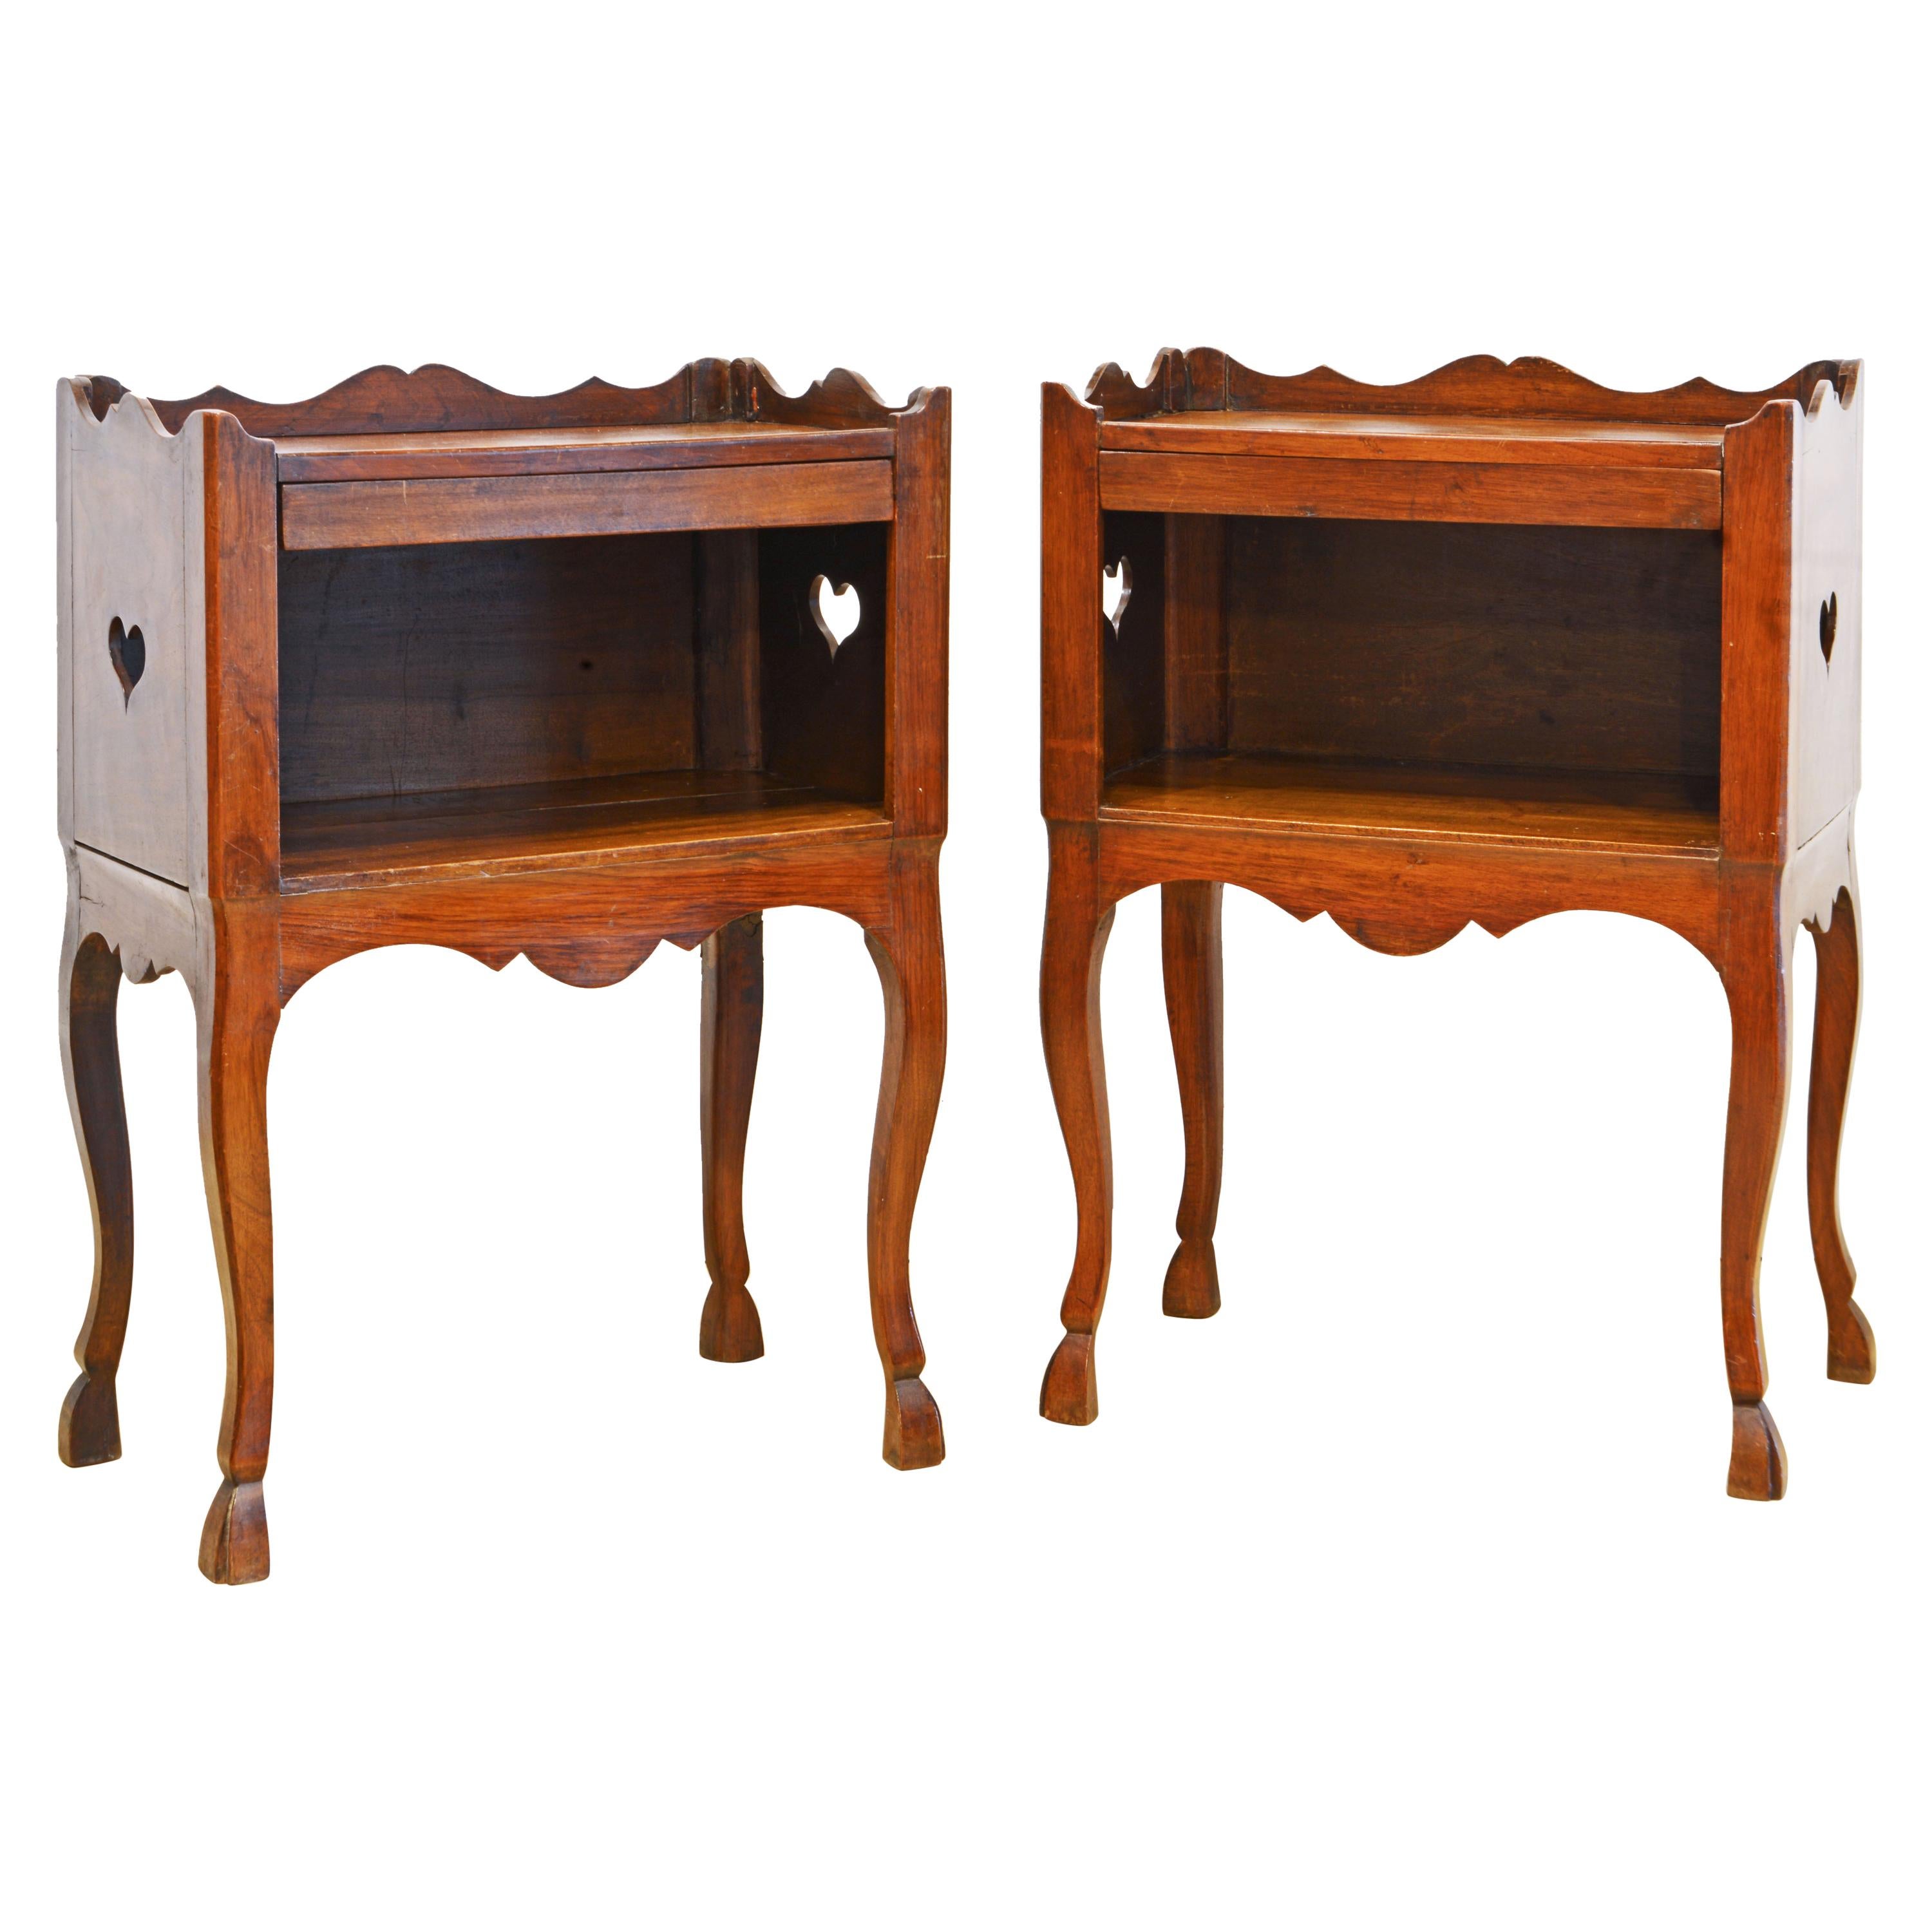 Pair of French Provincial Carved Walnut Side Tables with Concealed Drawers